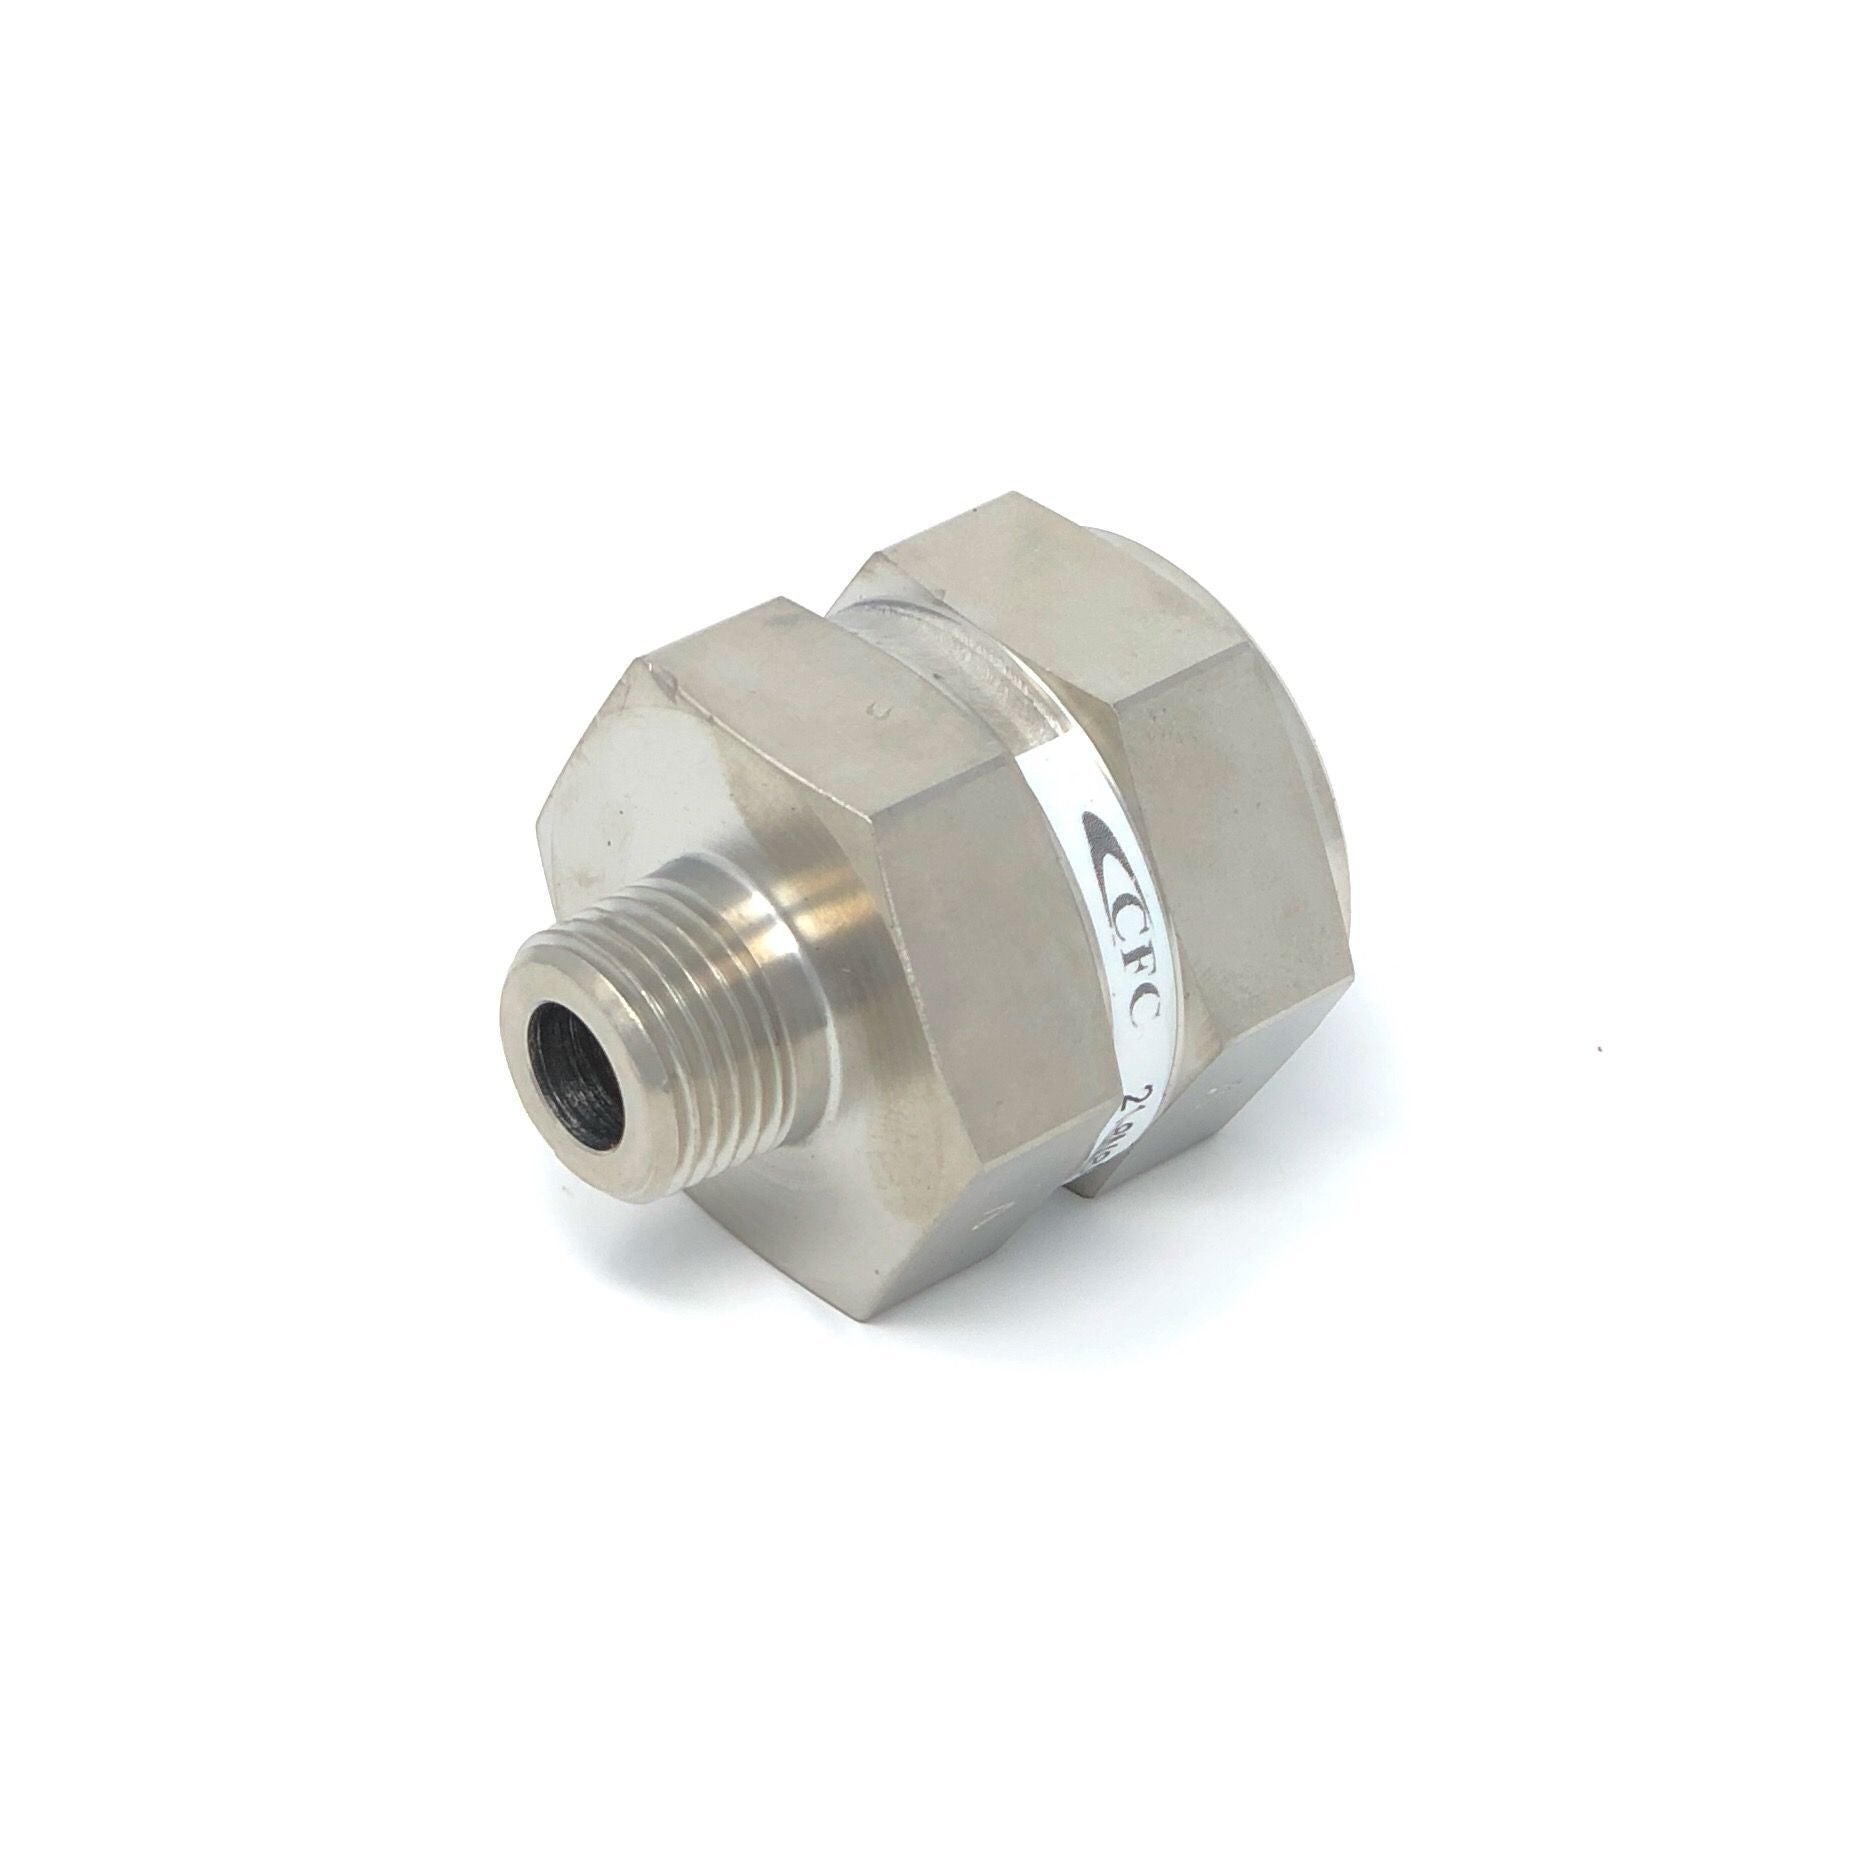 21-6M6M-40S : Chase High Pressure Inline Filter, 6000psi, #6 SAE (3/8"), 40 Micron, No Visual Indicator, No Bypass